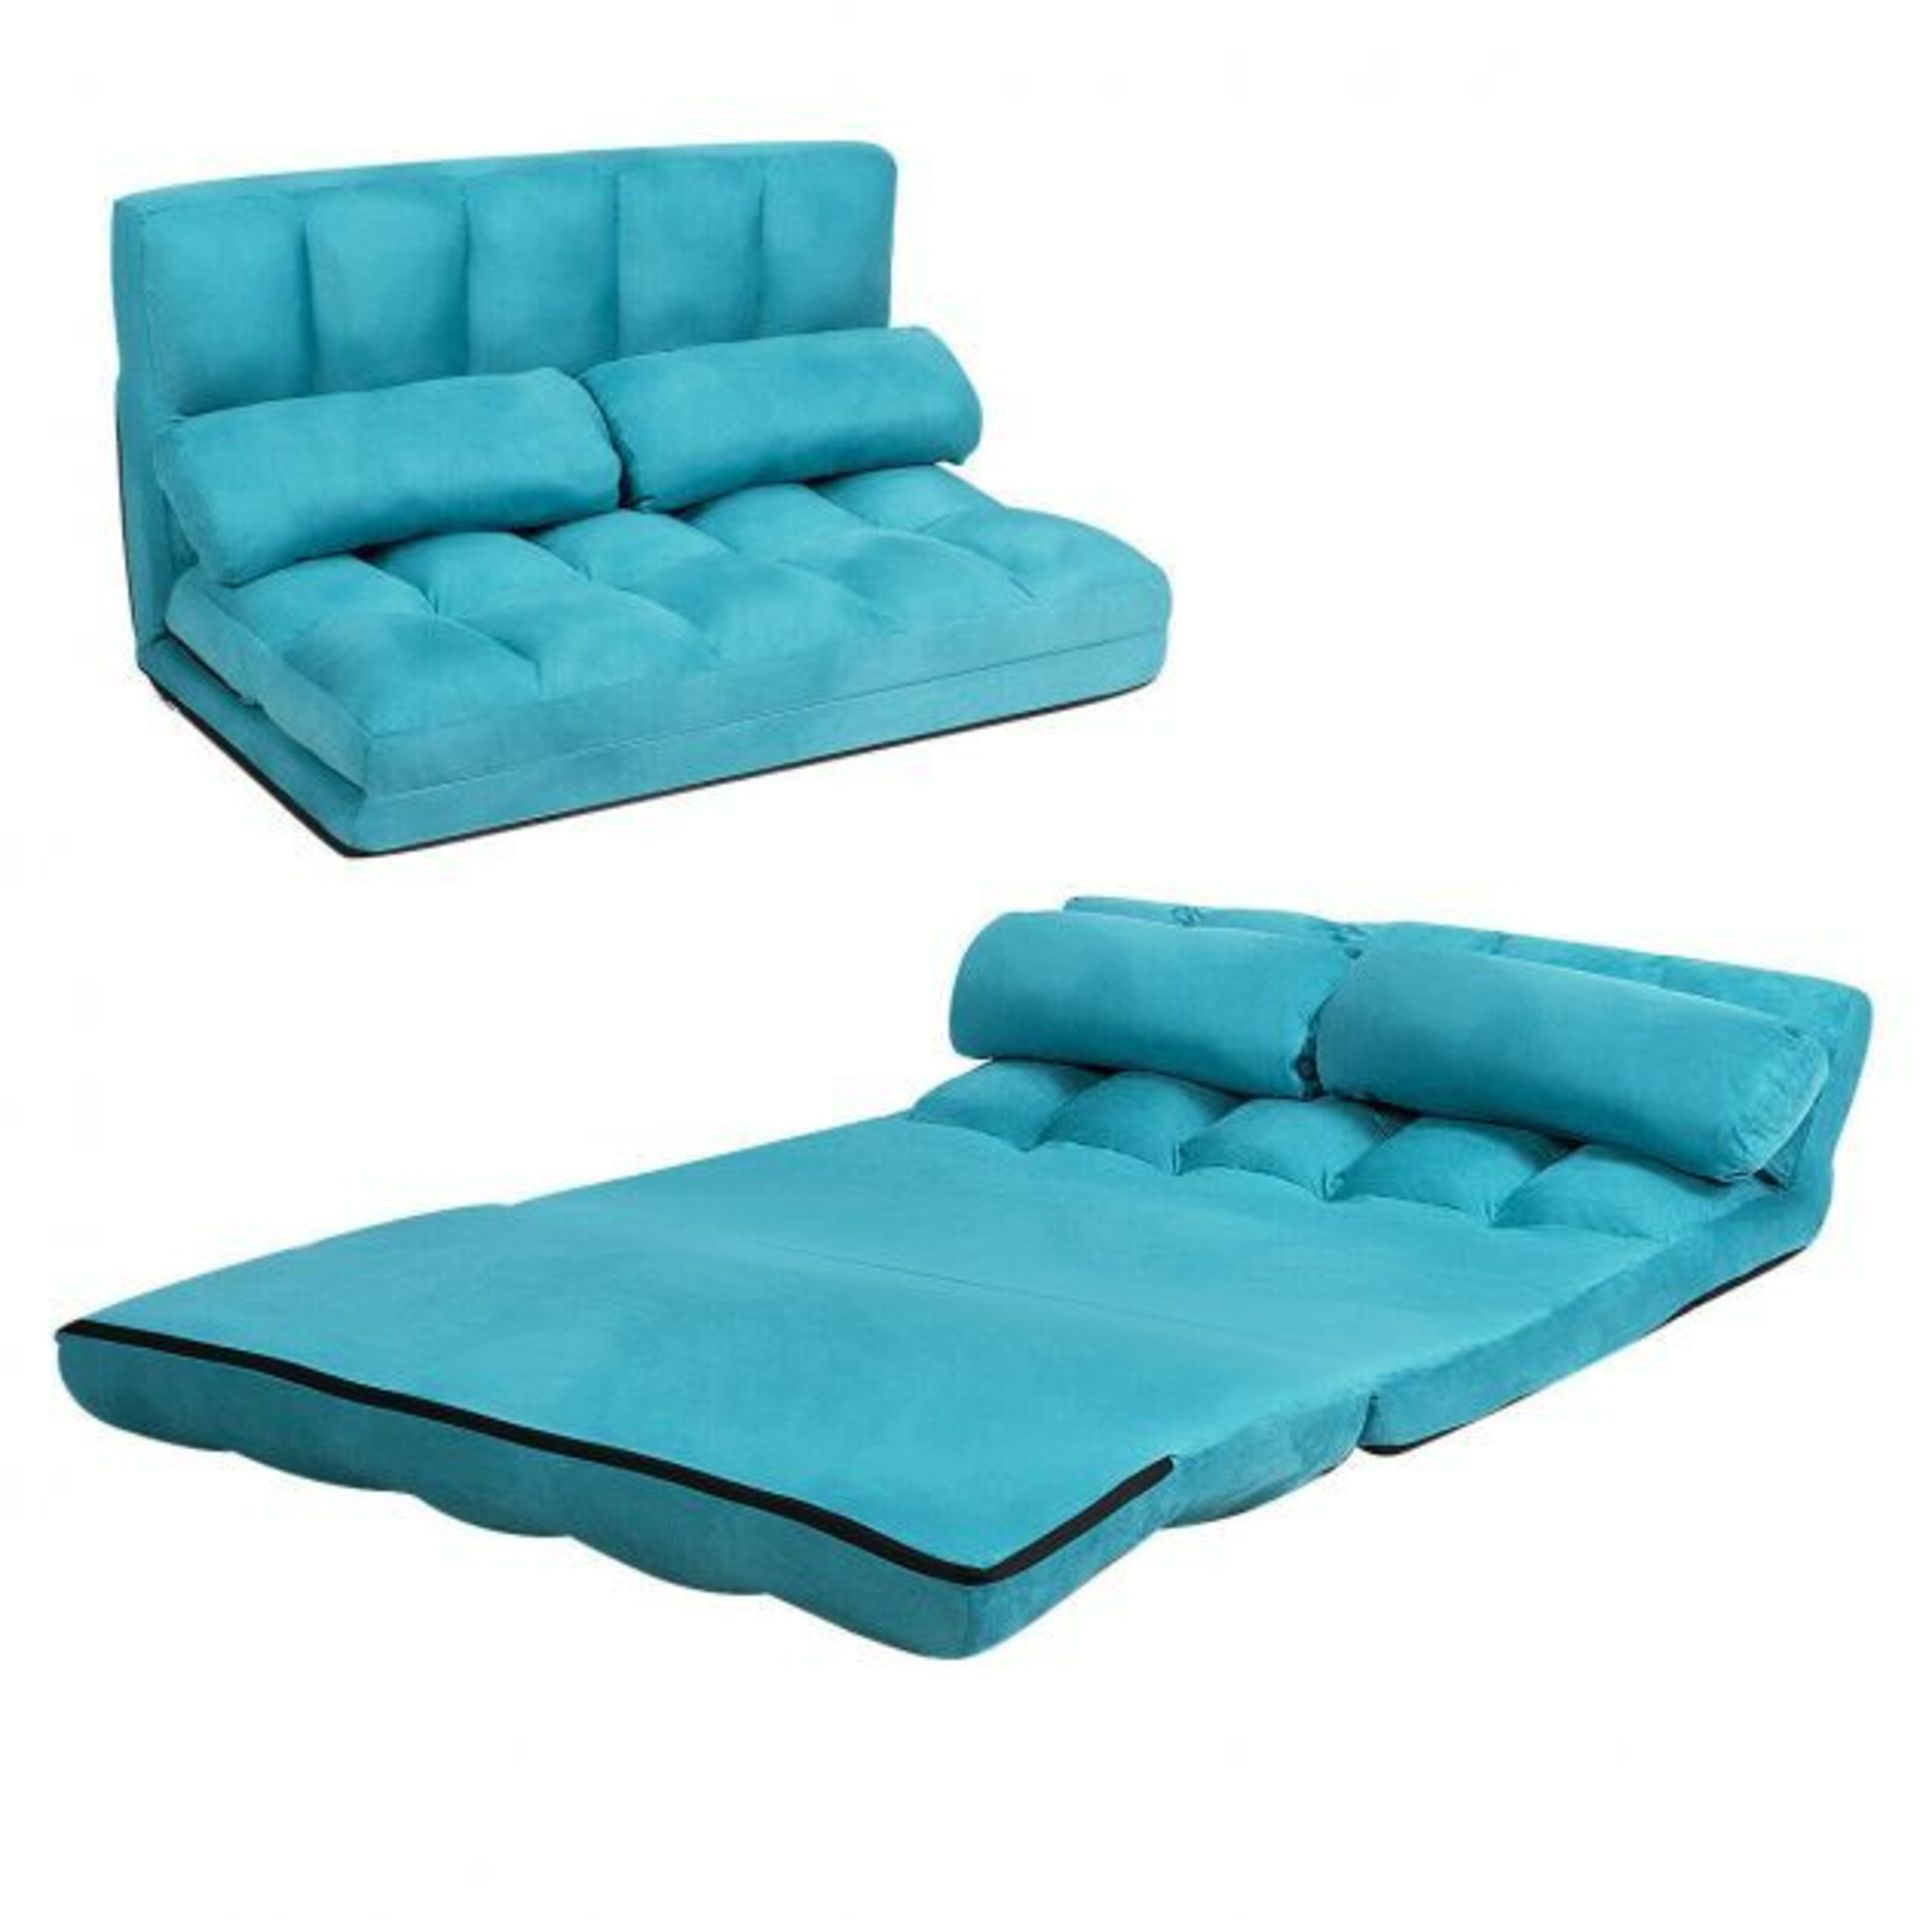 2 in 1 Folding Floor Lazy Sofa Bed with 6 Adjustable Seat Positions and 2 Pillows. - R13a.5.